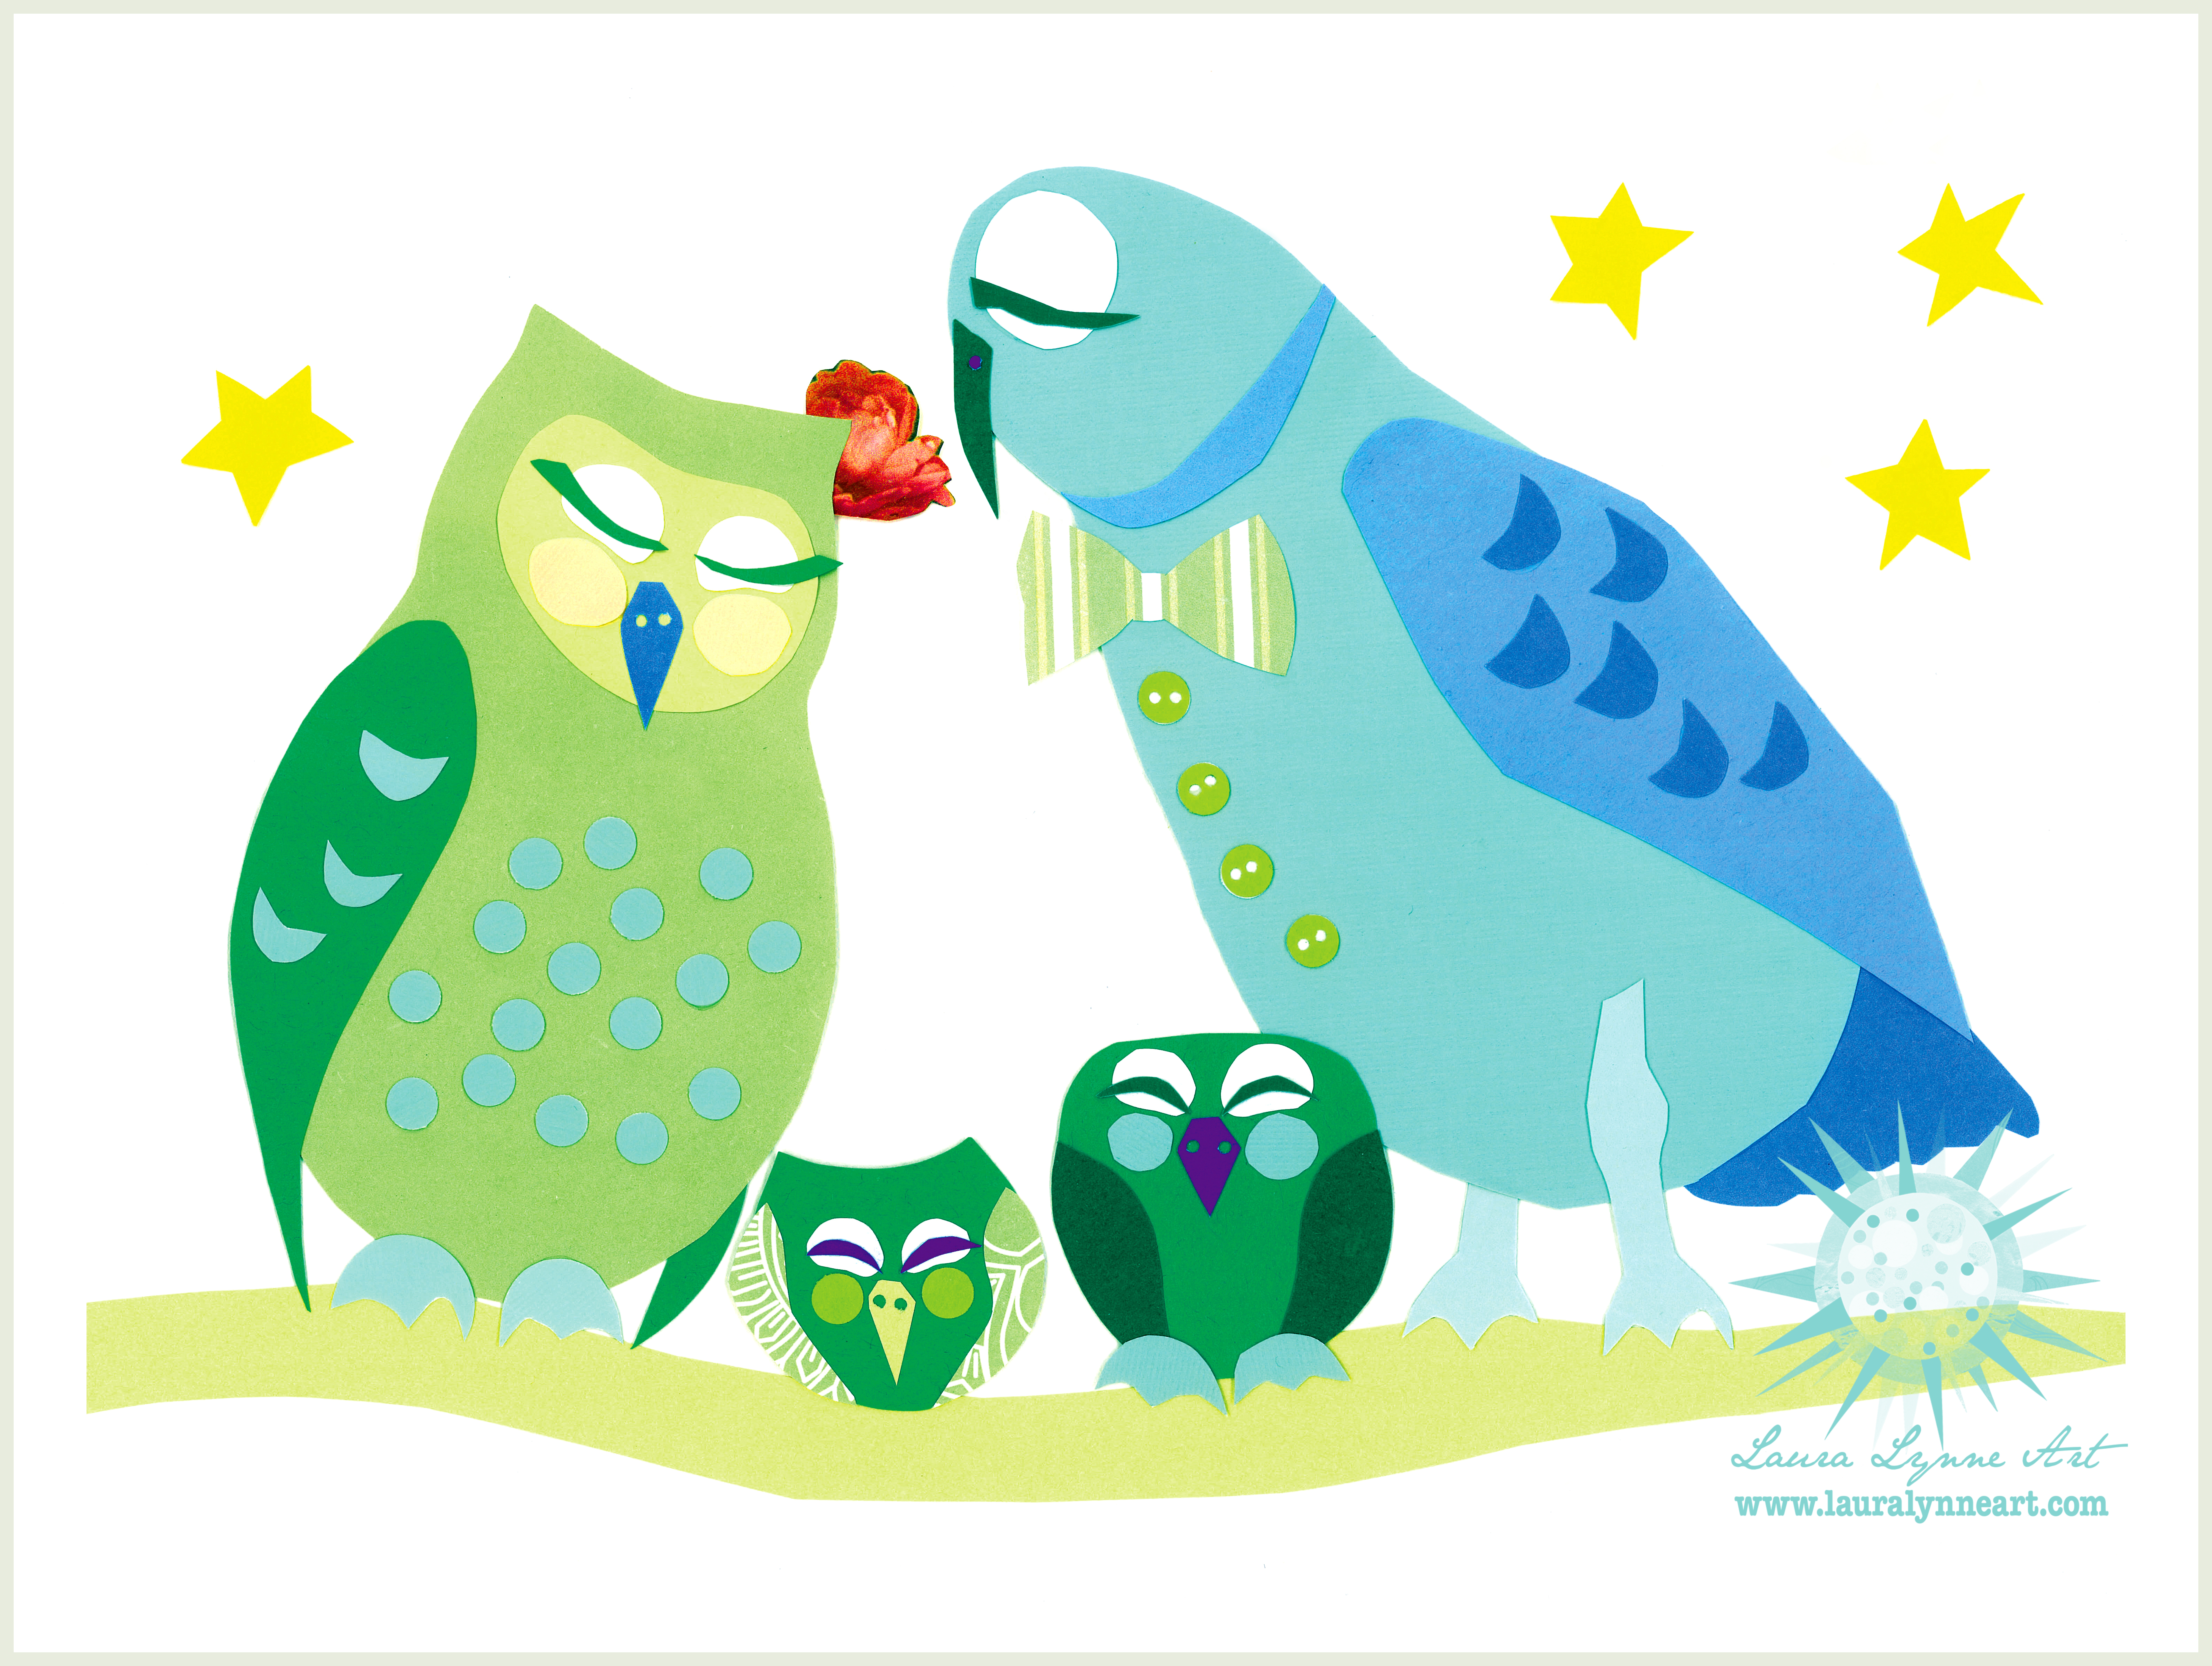 Illustration of a mother, father, and two baby owls sleeping on branch